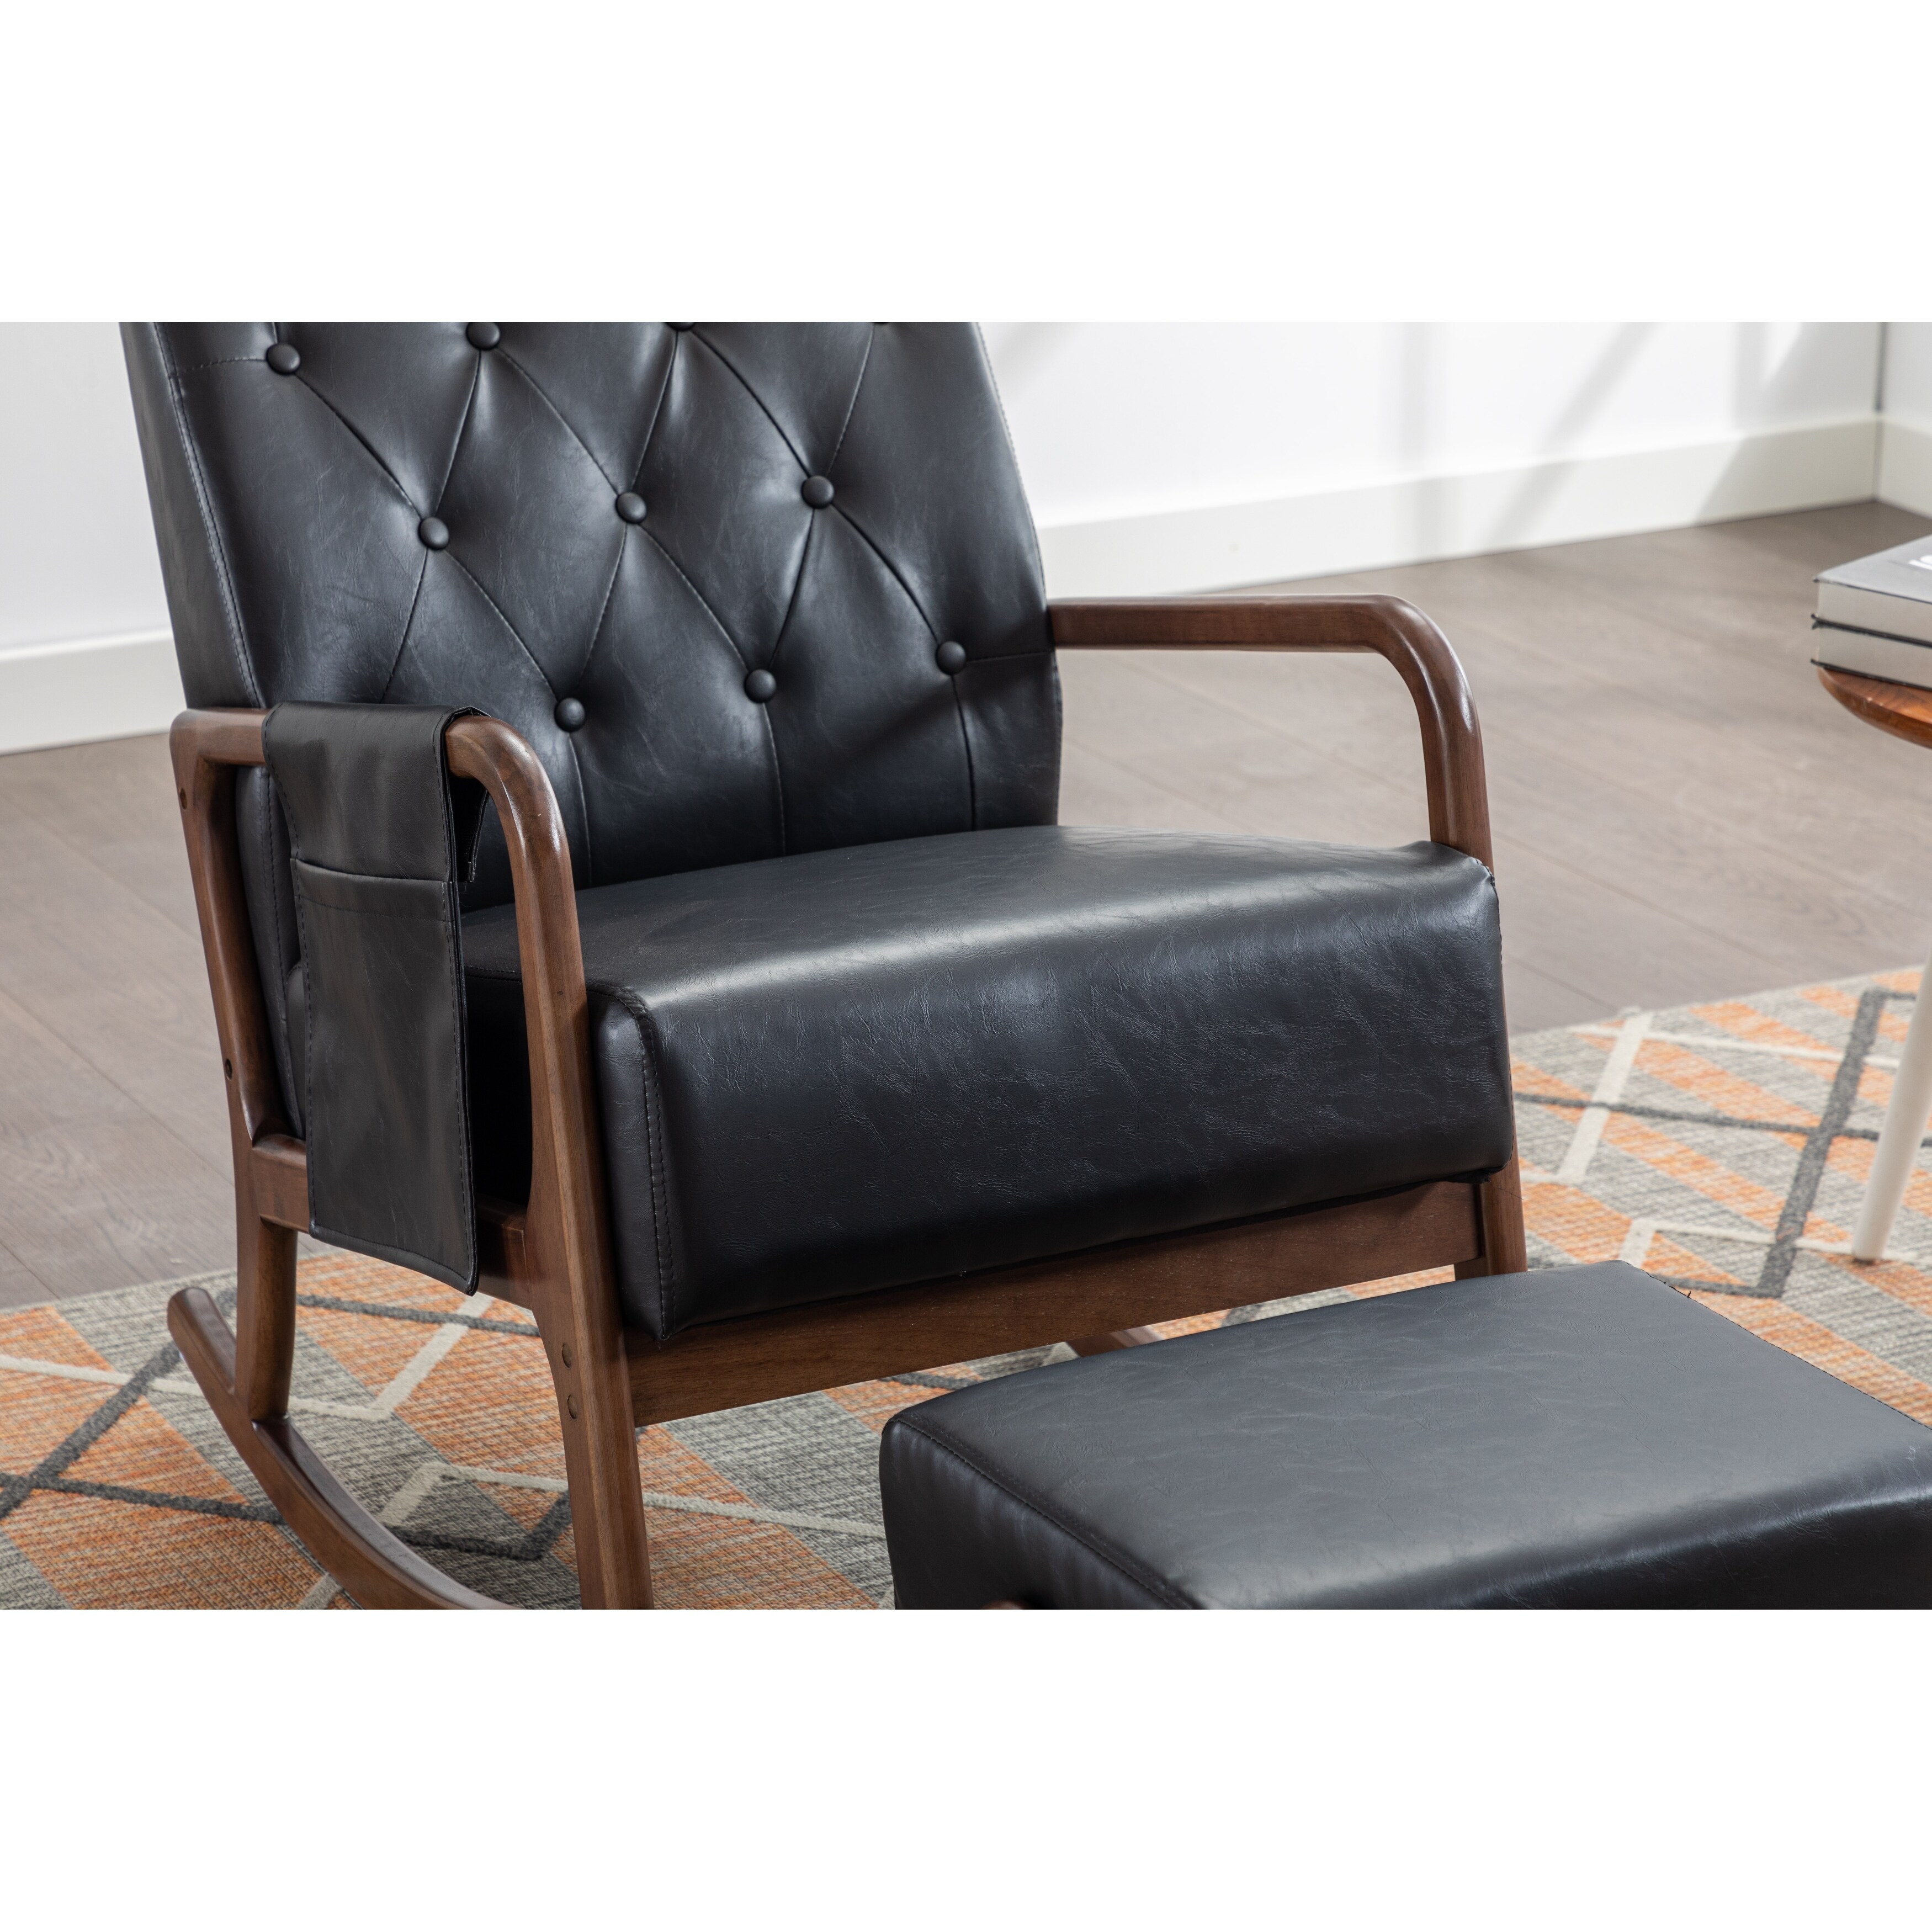 Mid-Century Modern Leather Rocking Chair With Ottoman